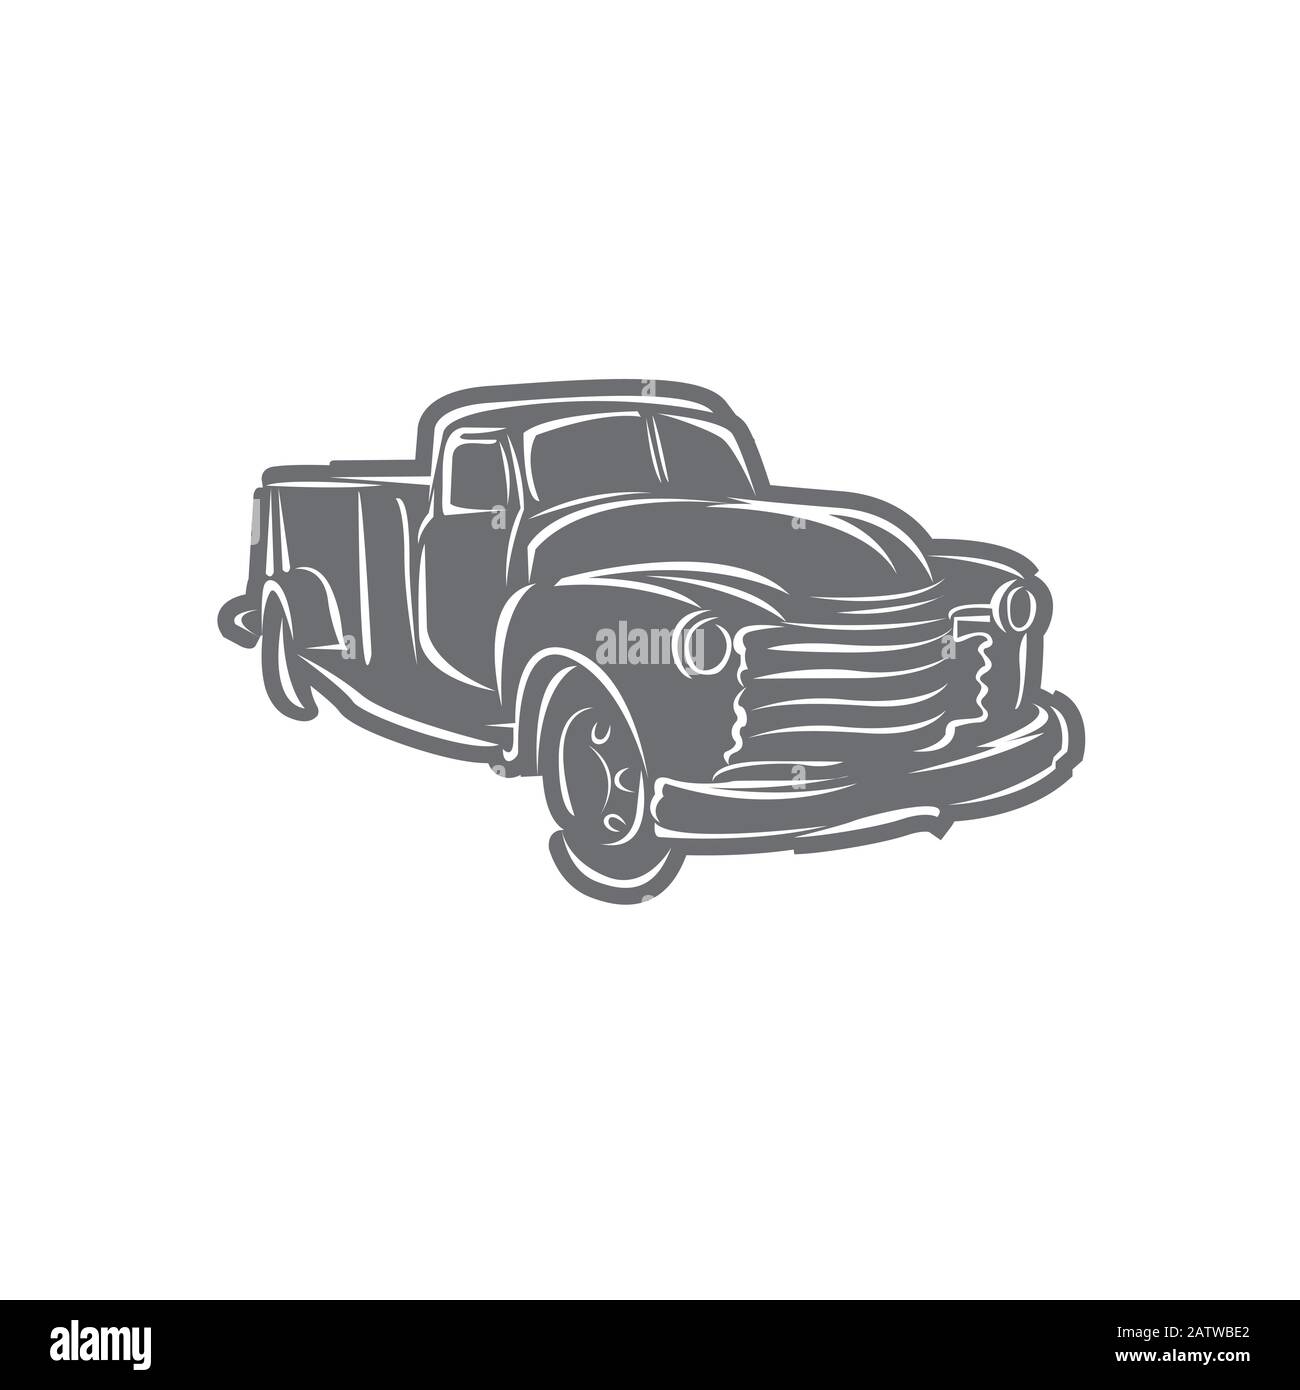 Old retro pickup truck vector illustration. Vintage transport vehicle. Simple vector icon or logo Stock Vector